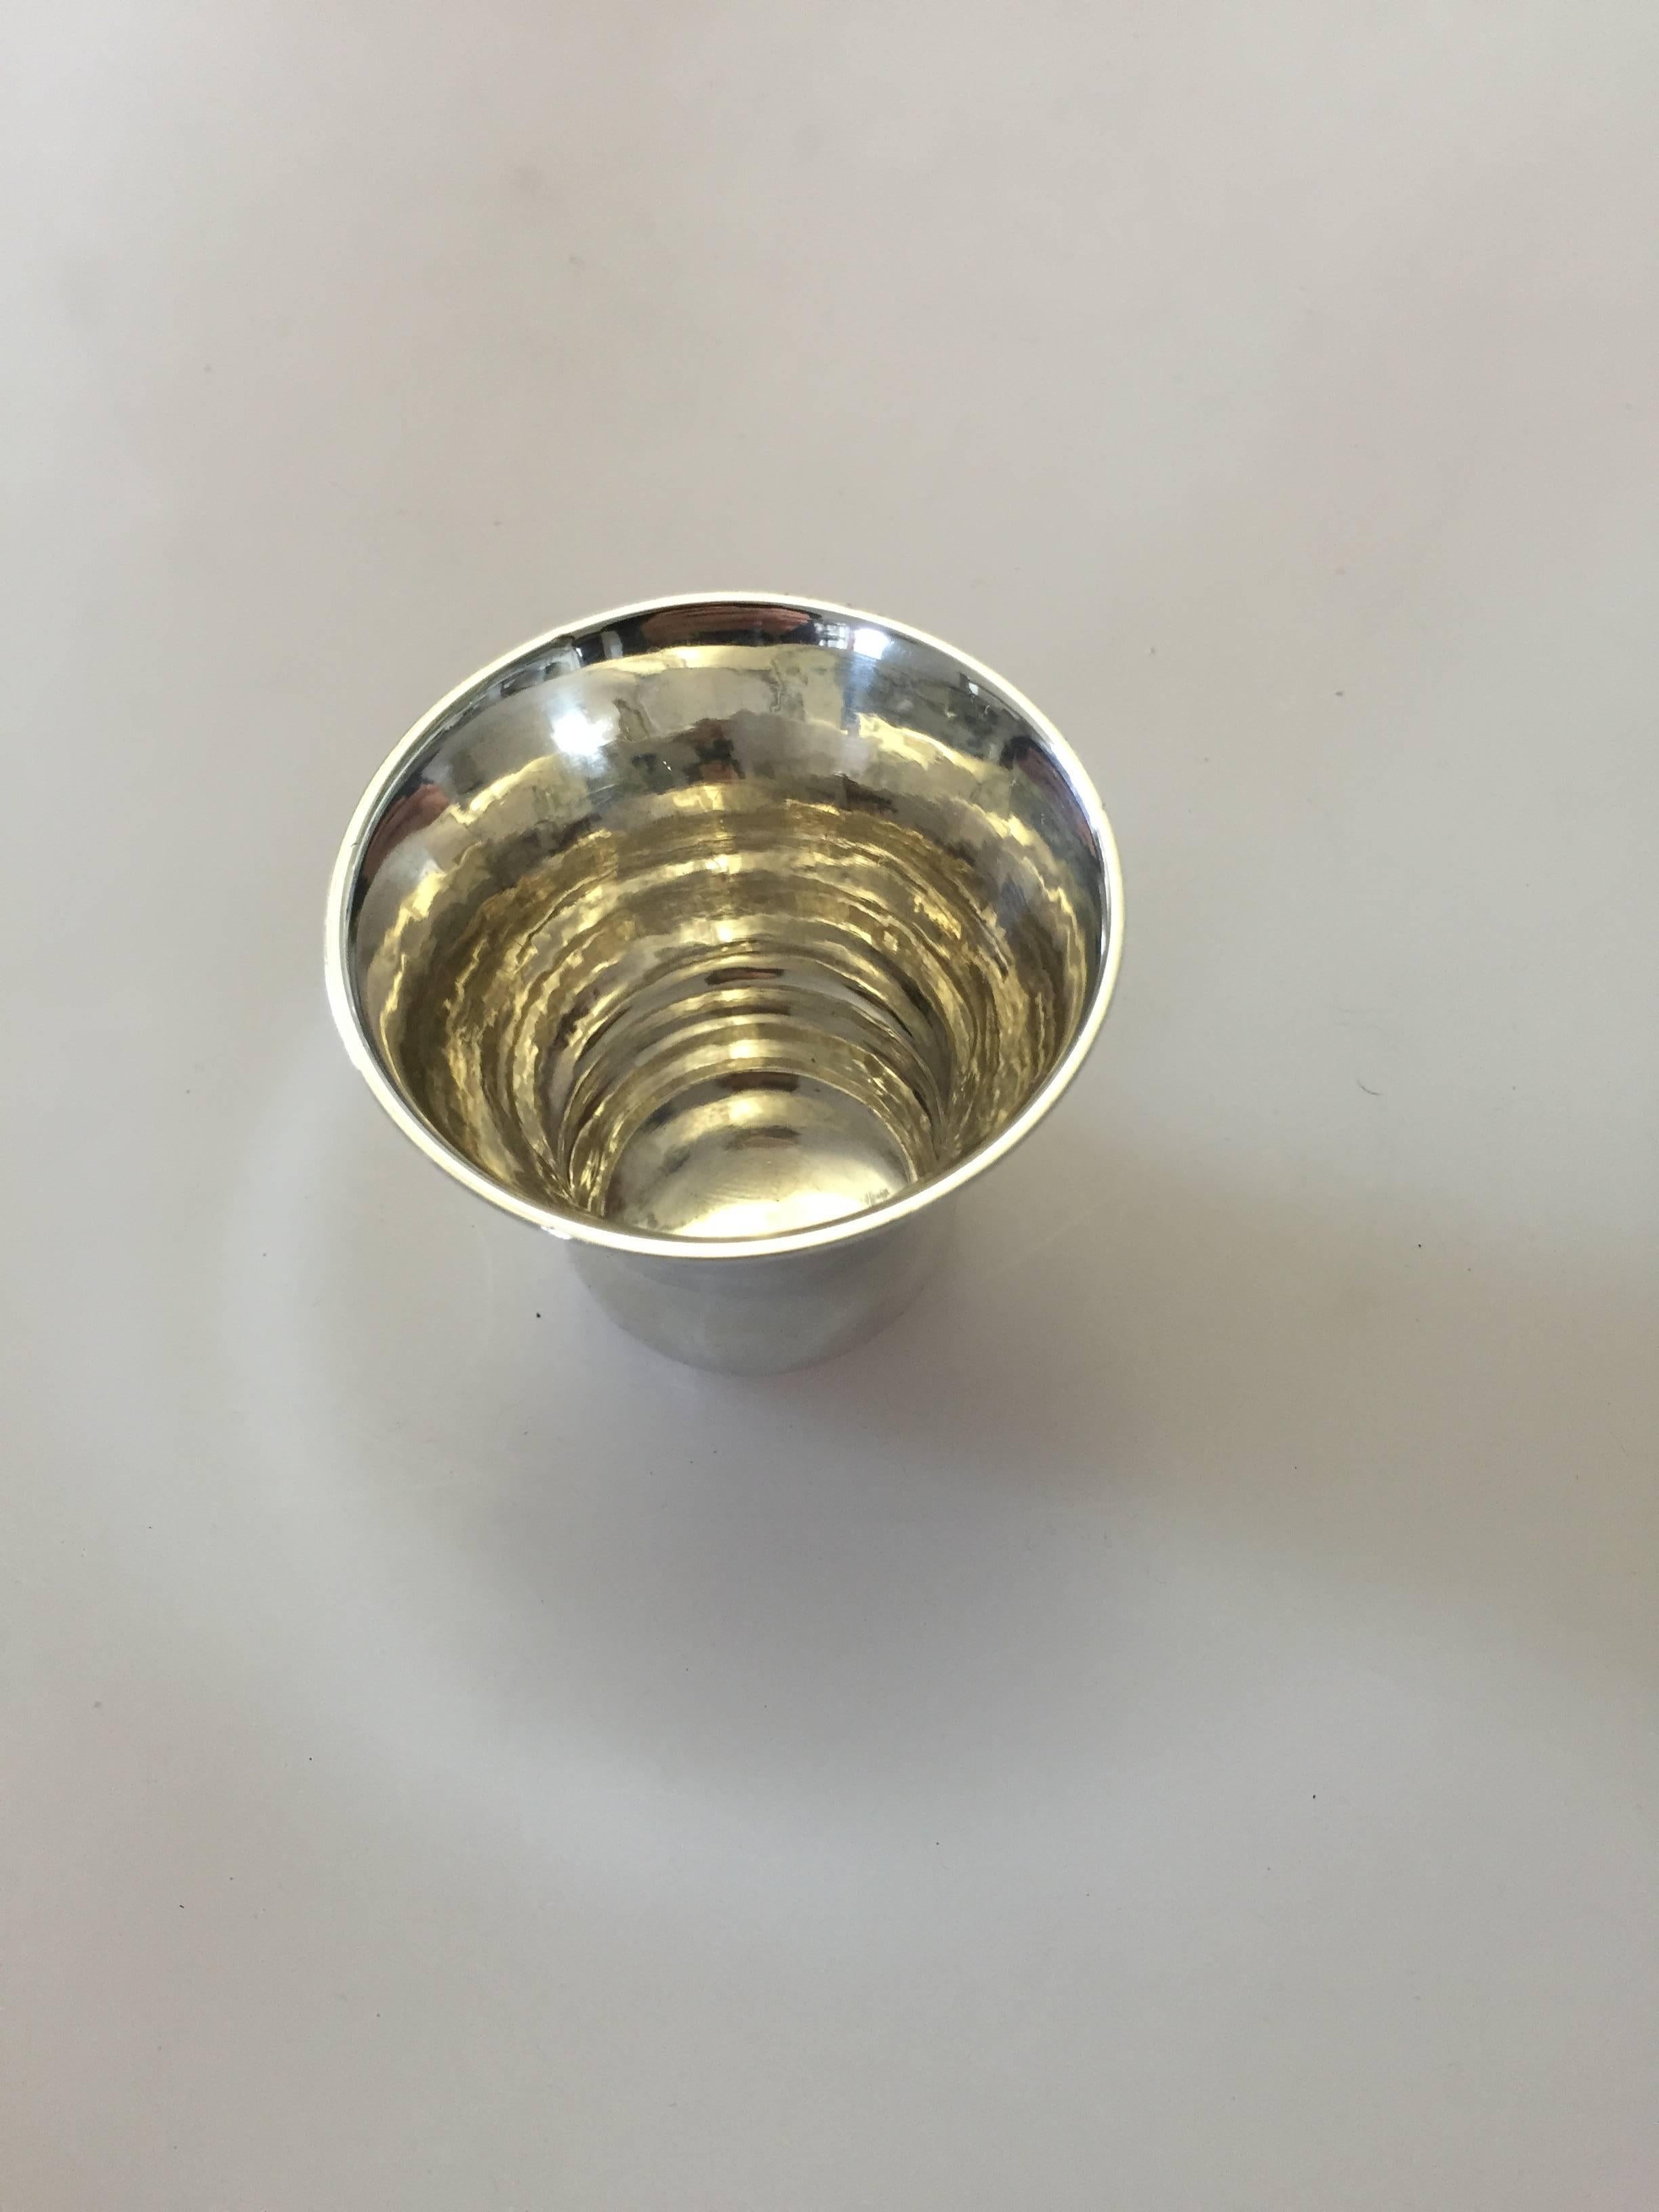 Georg Jensen sterling silver cup #391. Designed by Georg Jensen this cup measures 6 cm. It has a few dents and is engraved but otherwise in good condition. 

Georg Jensen (1866-1935) opened his small silver atelier in Copenhagen, Denmark in 1904.